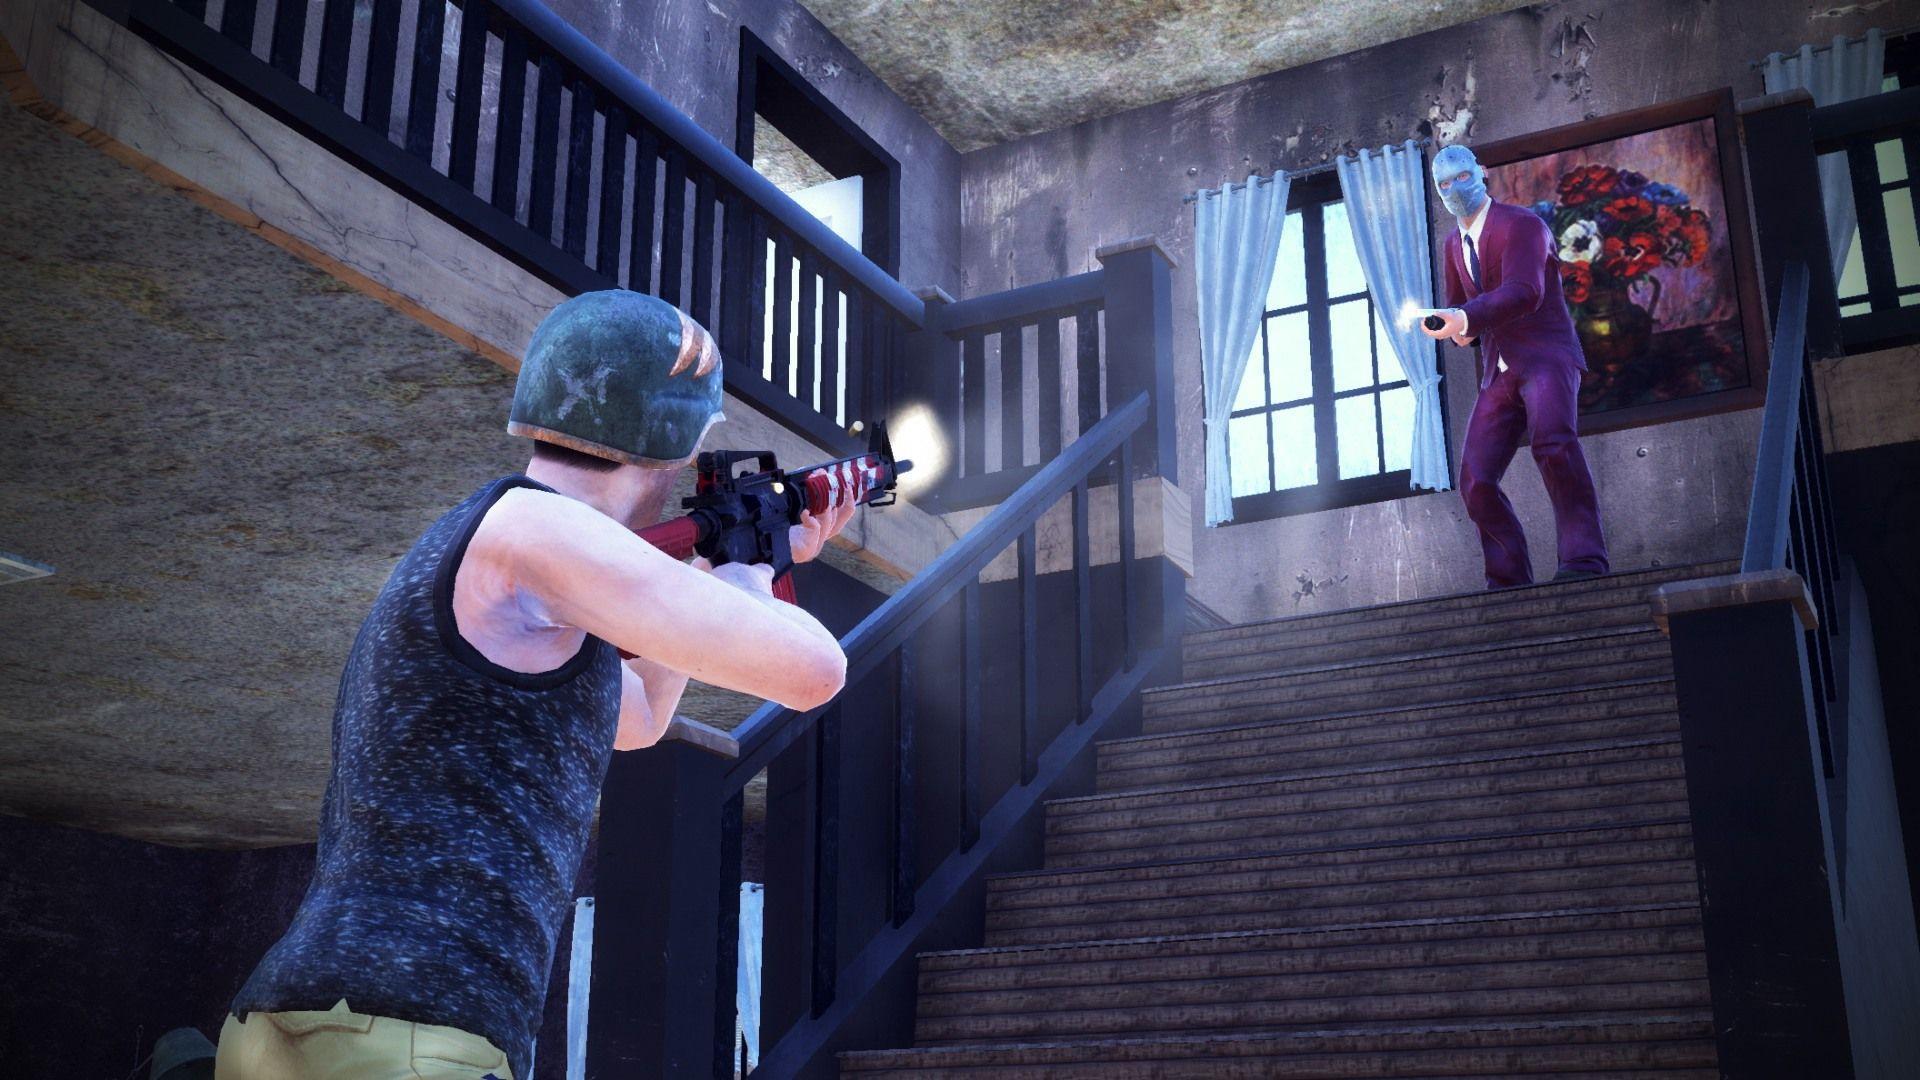 H1Z1: King of the Kill Screenshots, Picture, Wallpaper